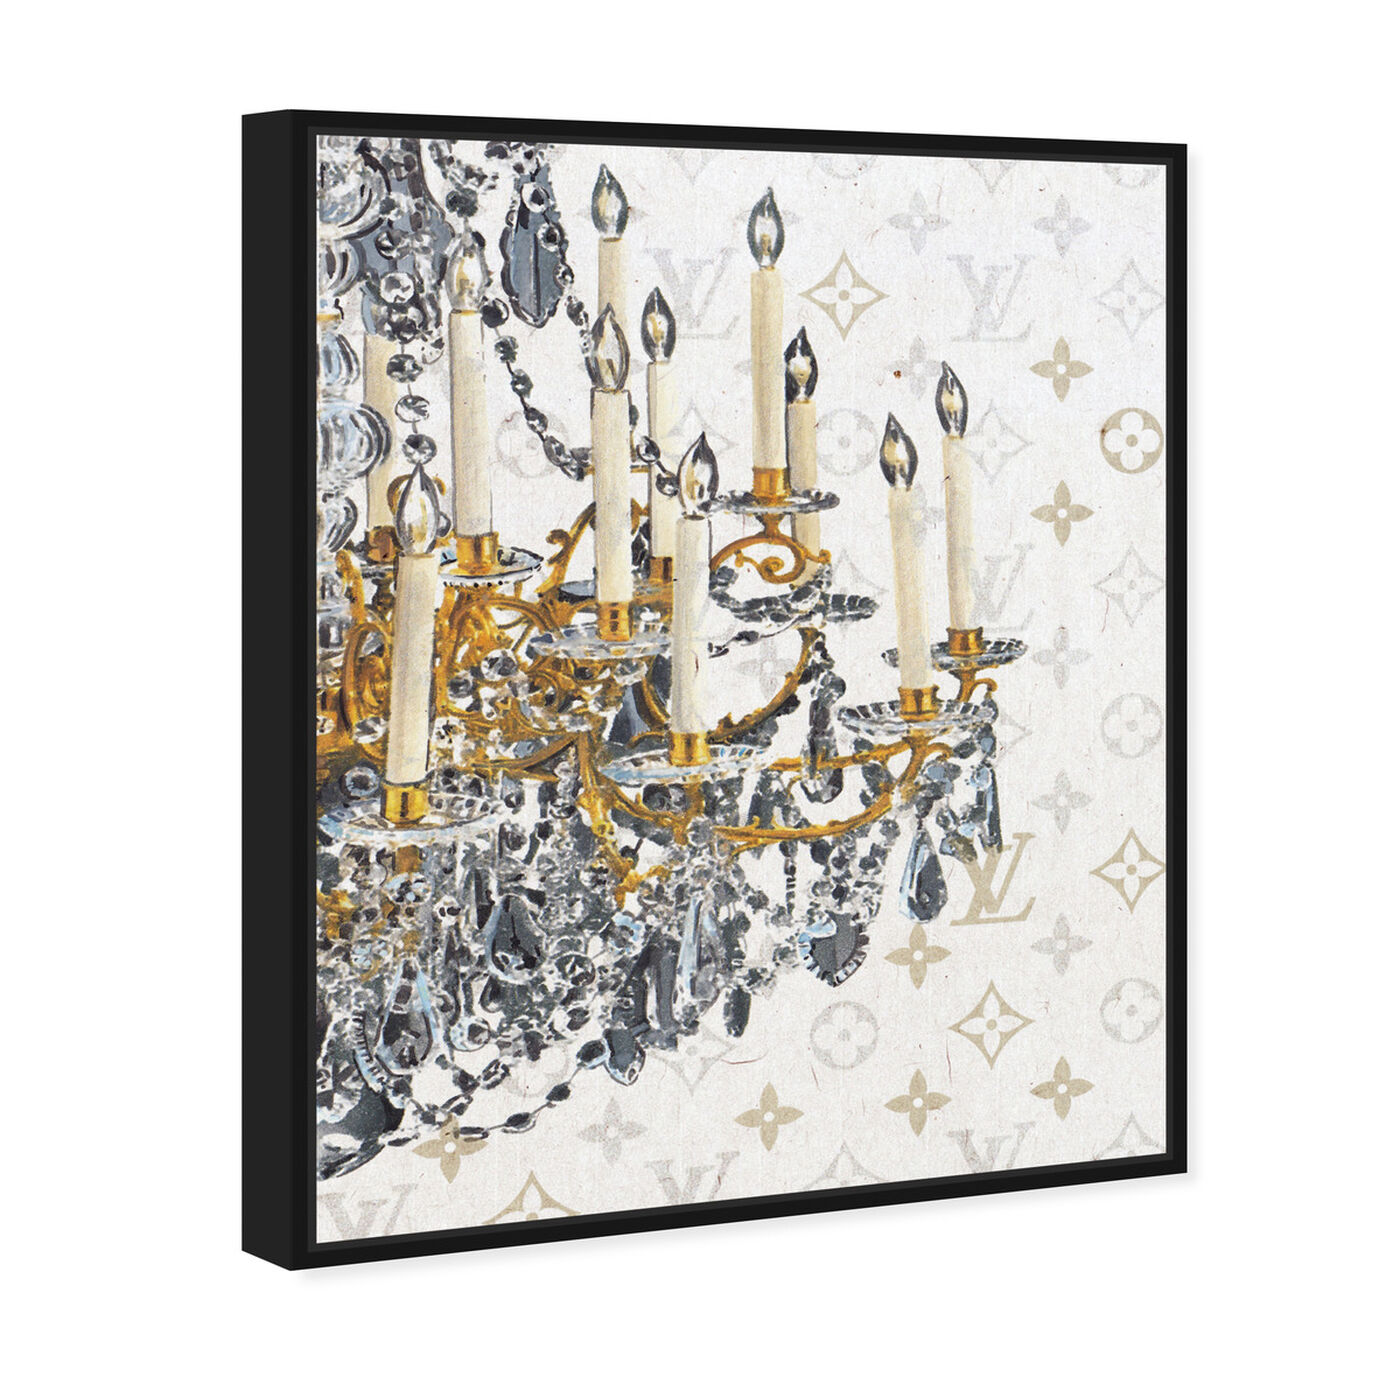 Angled view of Fancy Light II featuring fashion and glam and chandeliers art.